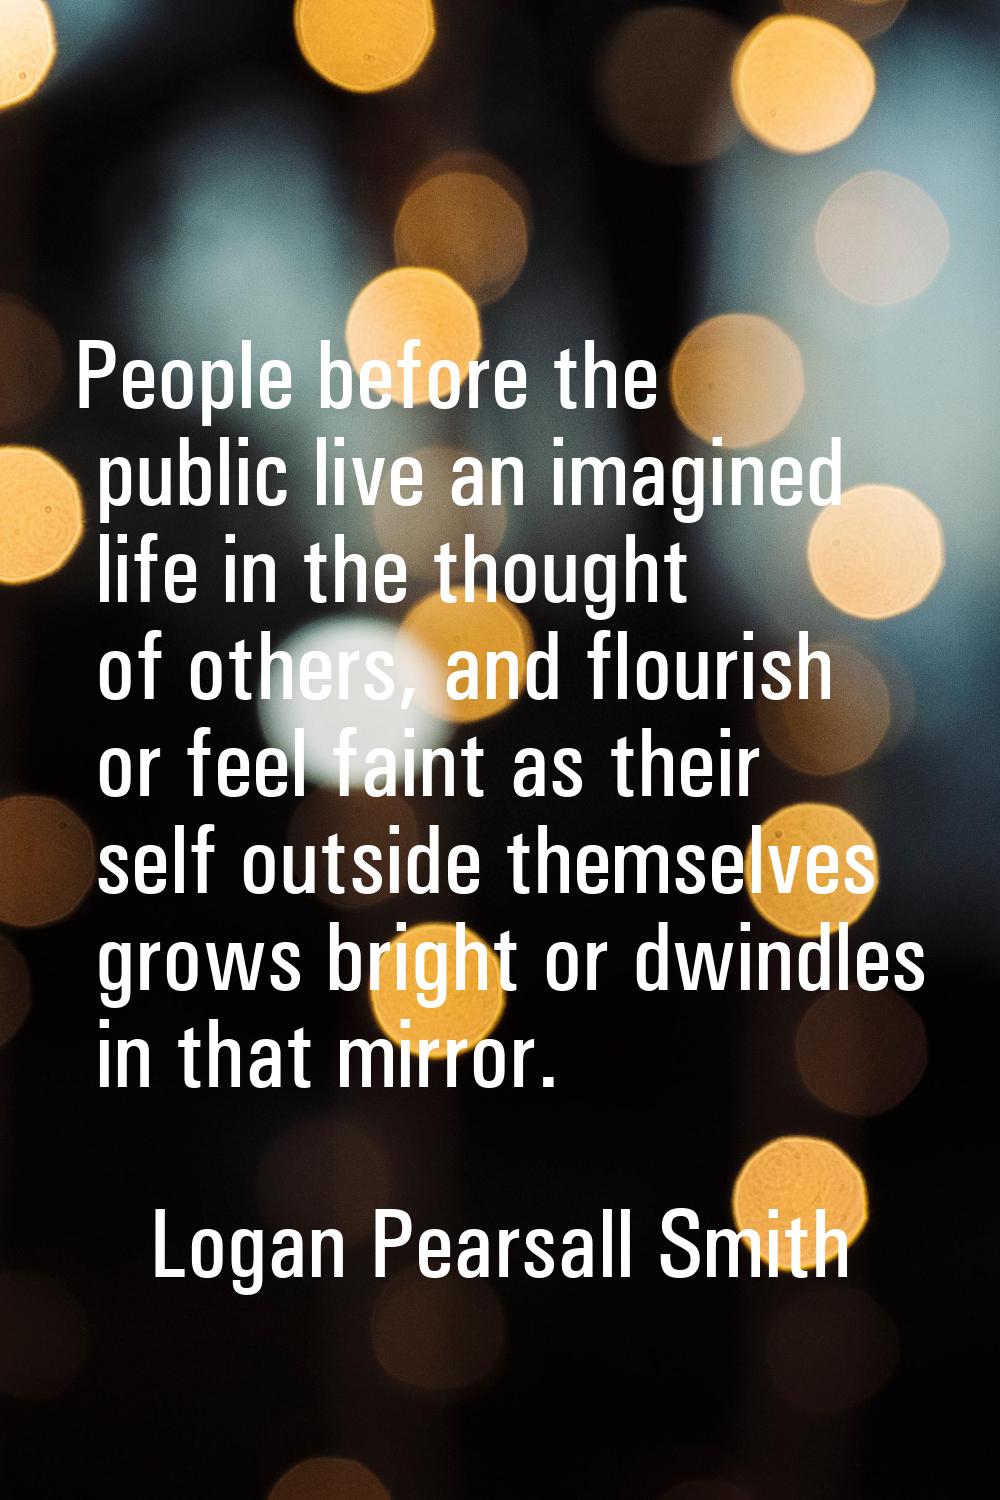 People before the public live an imagined life in the thought of others, and flourish or feel faint